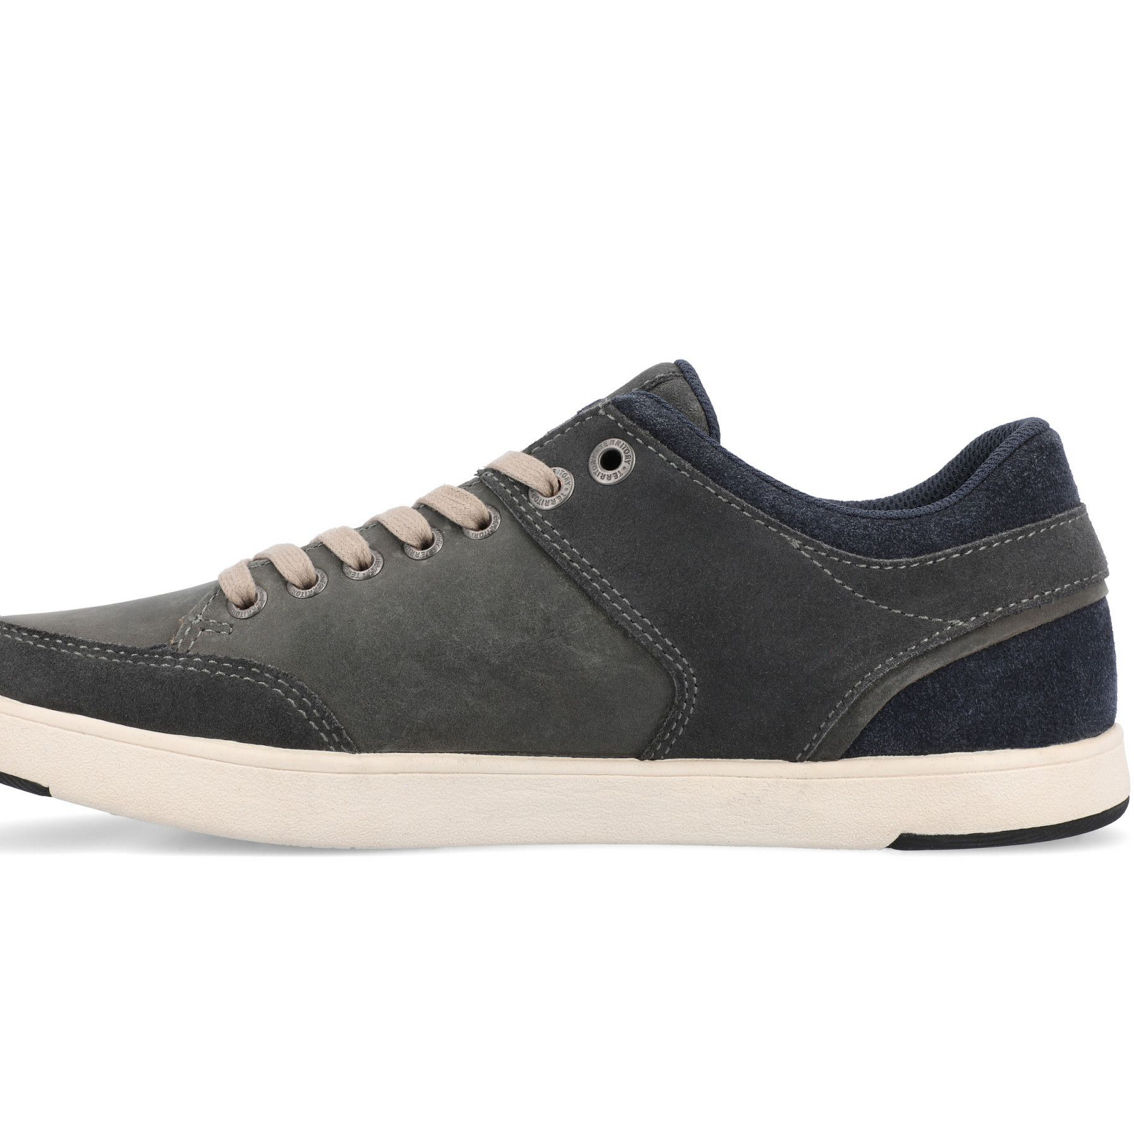 Territory Pacer Casual Leather Sneaker - Image 4 of 4